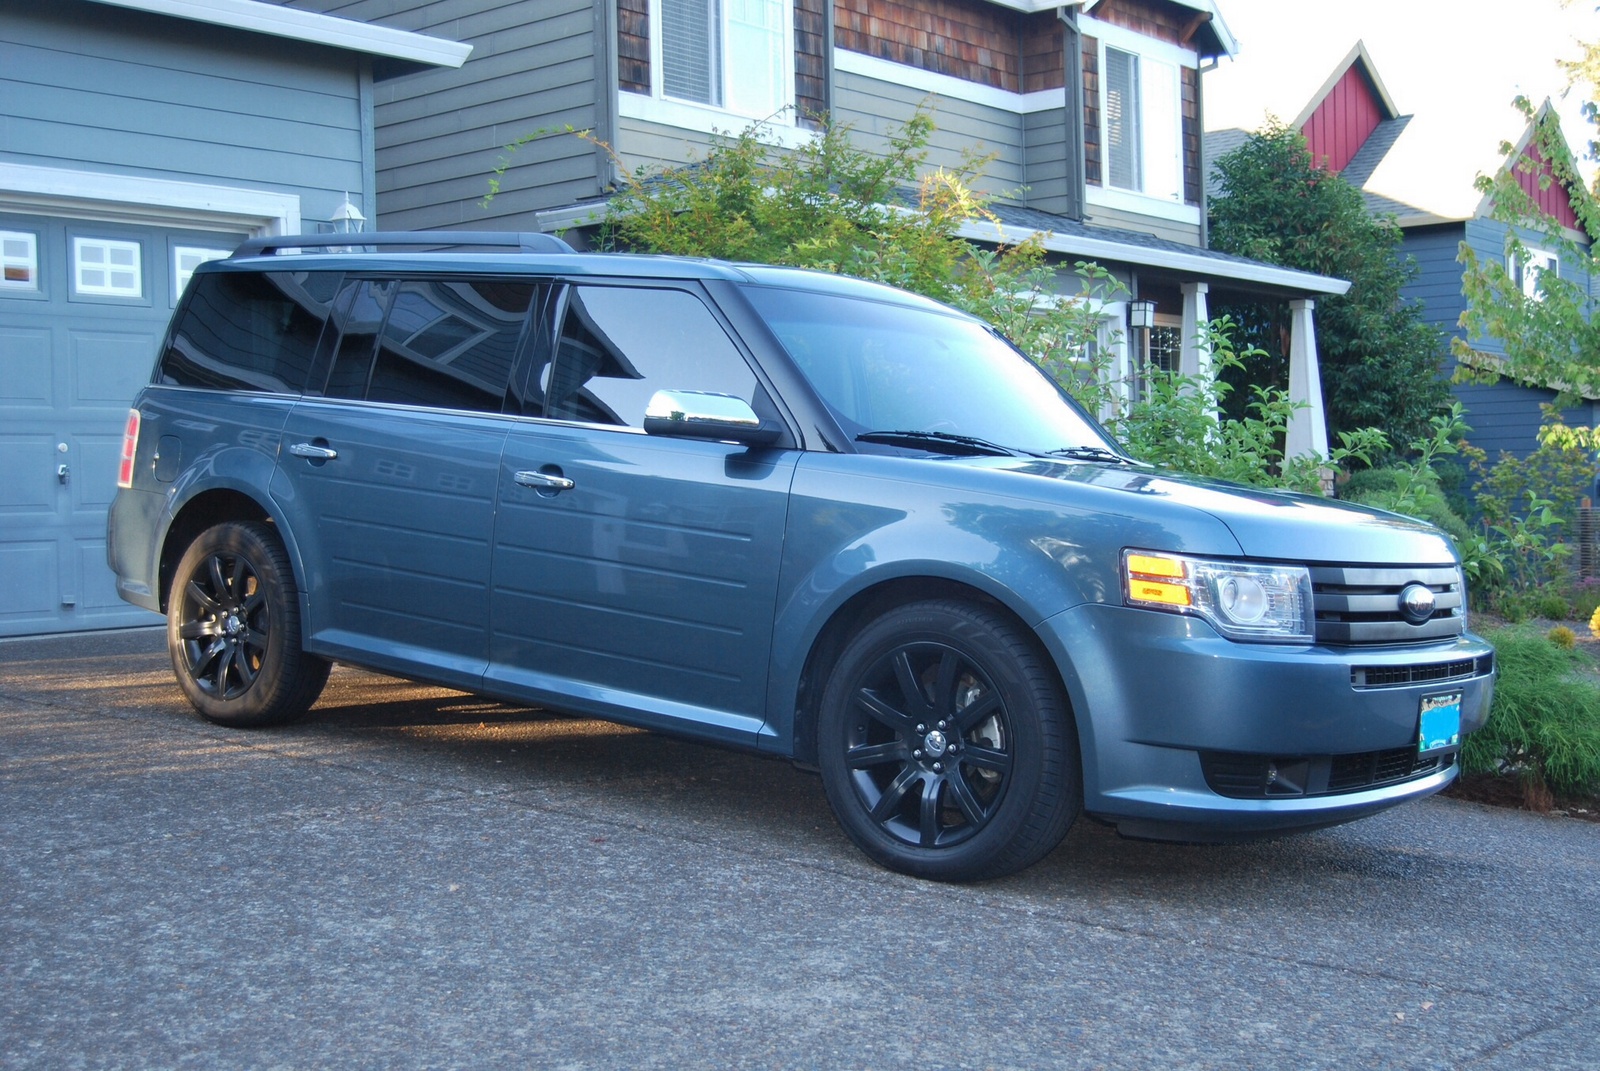 2010 Ford flex limited awd review #9